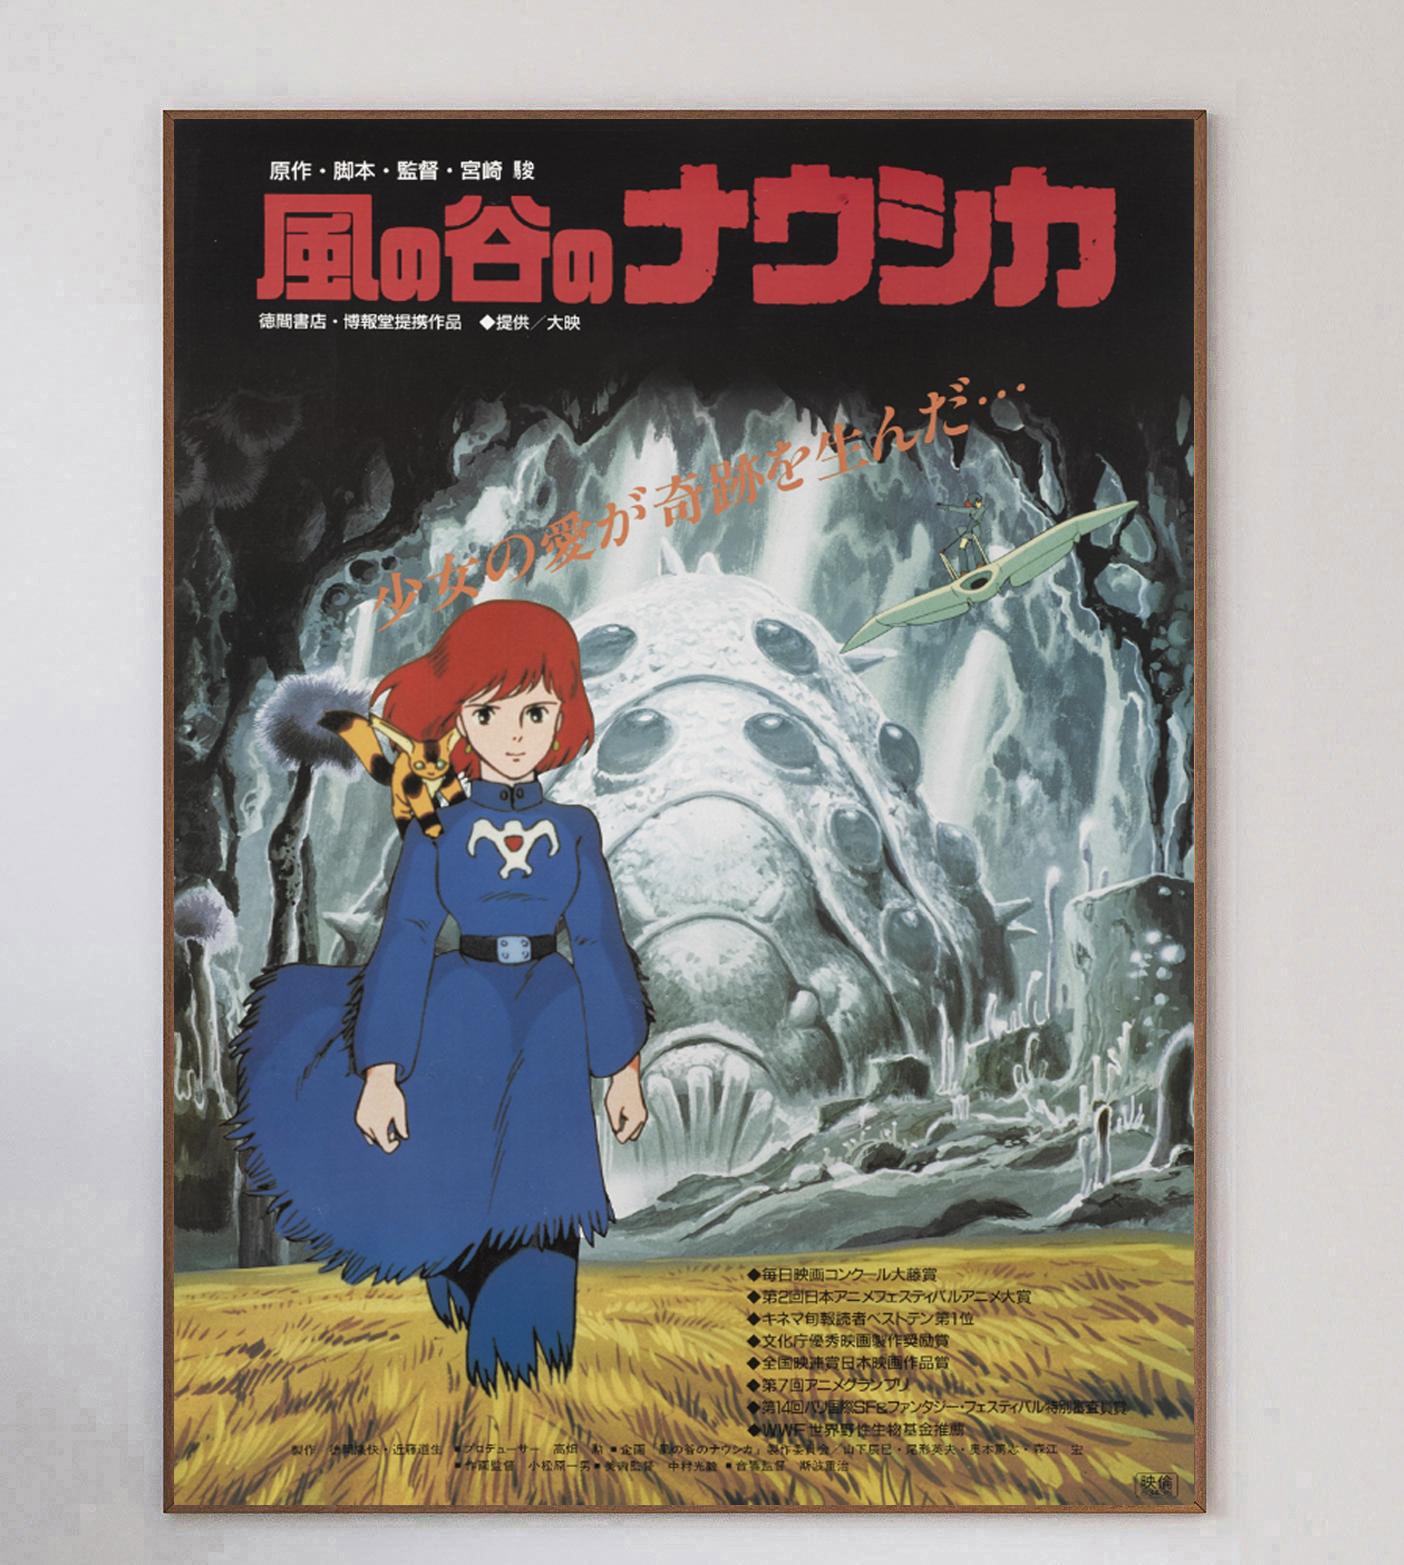 Based on the 1982 manga of the same name, Nausicaa Of The Valley Of The Wind was released in 1984. Written and directed by anime and animation legend Hayao Miyazaki, the film is widely regarded as one of the greatest animated films of all time.